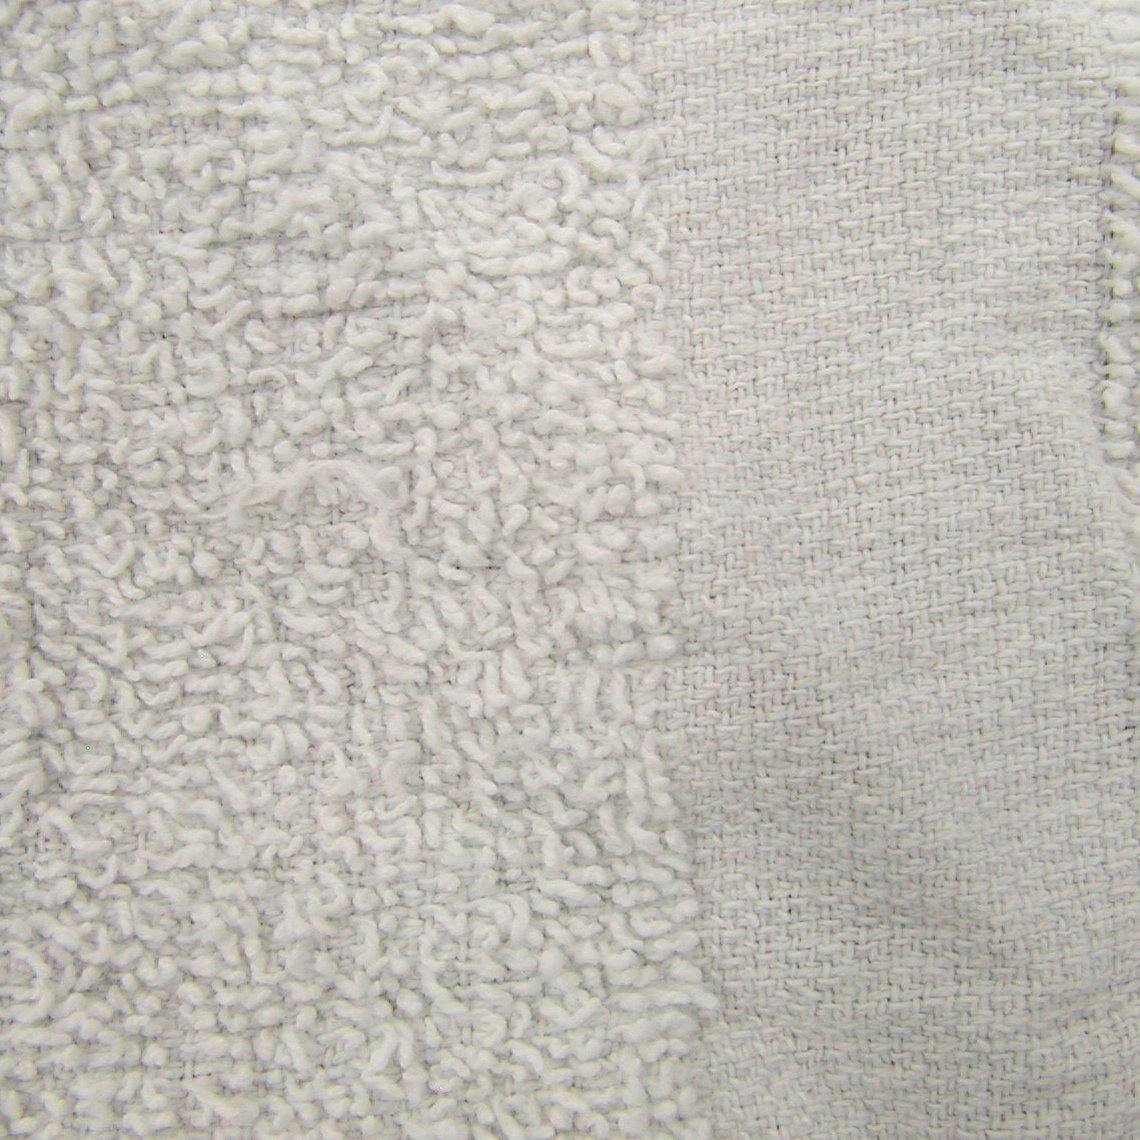  A-I-A Angel-In-Armor White Terry Cloth Rags, 16”x19